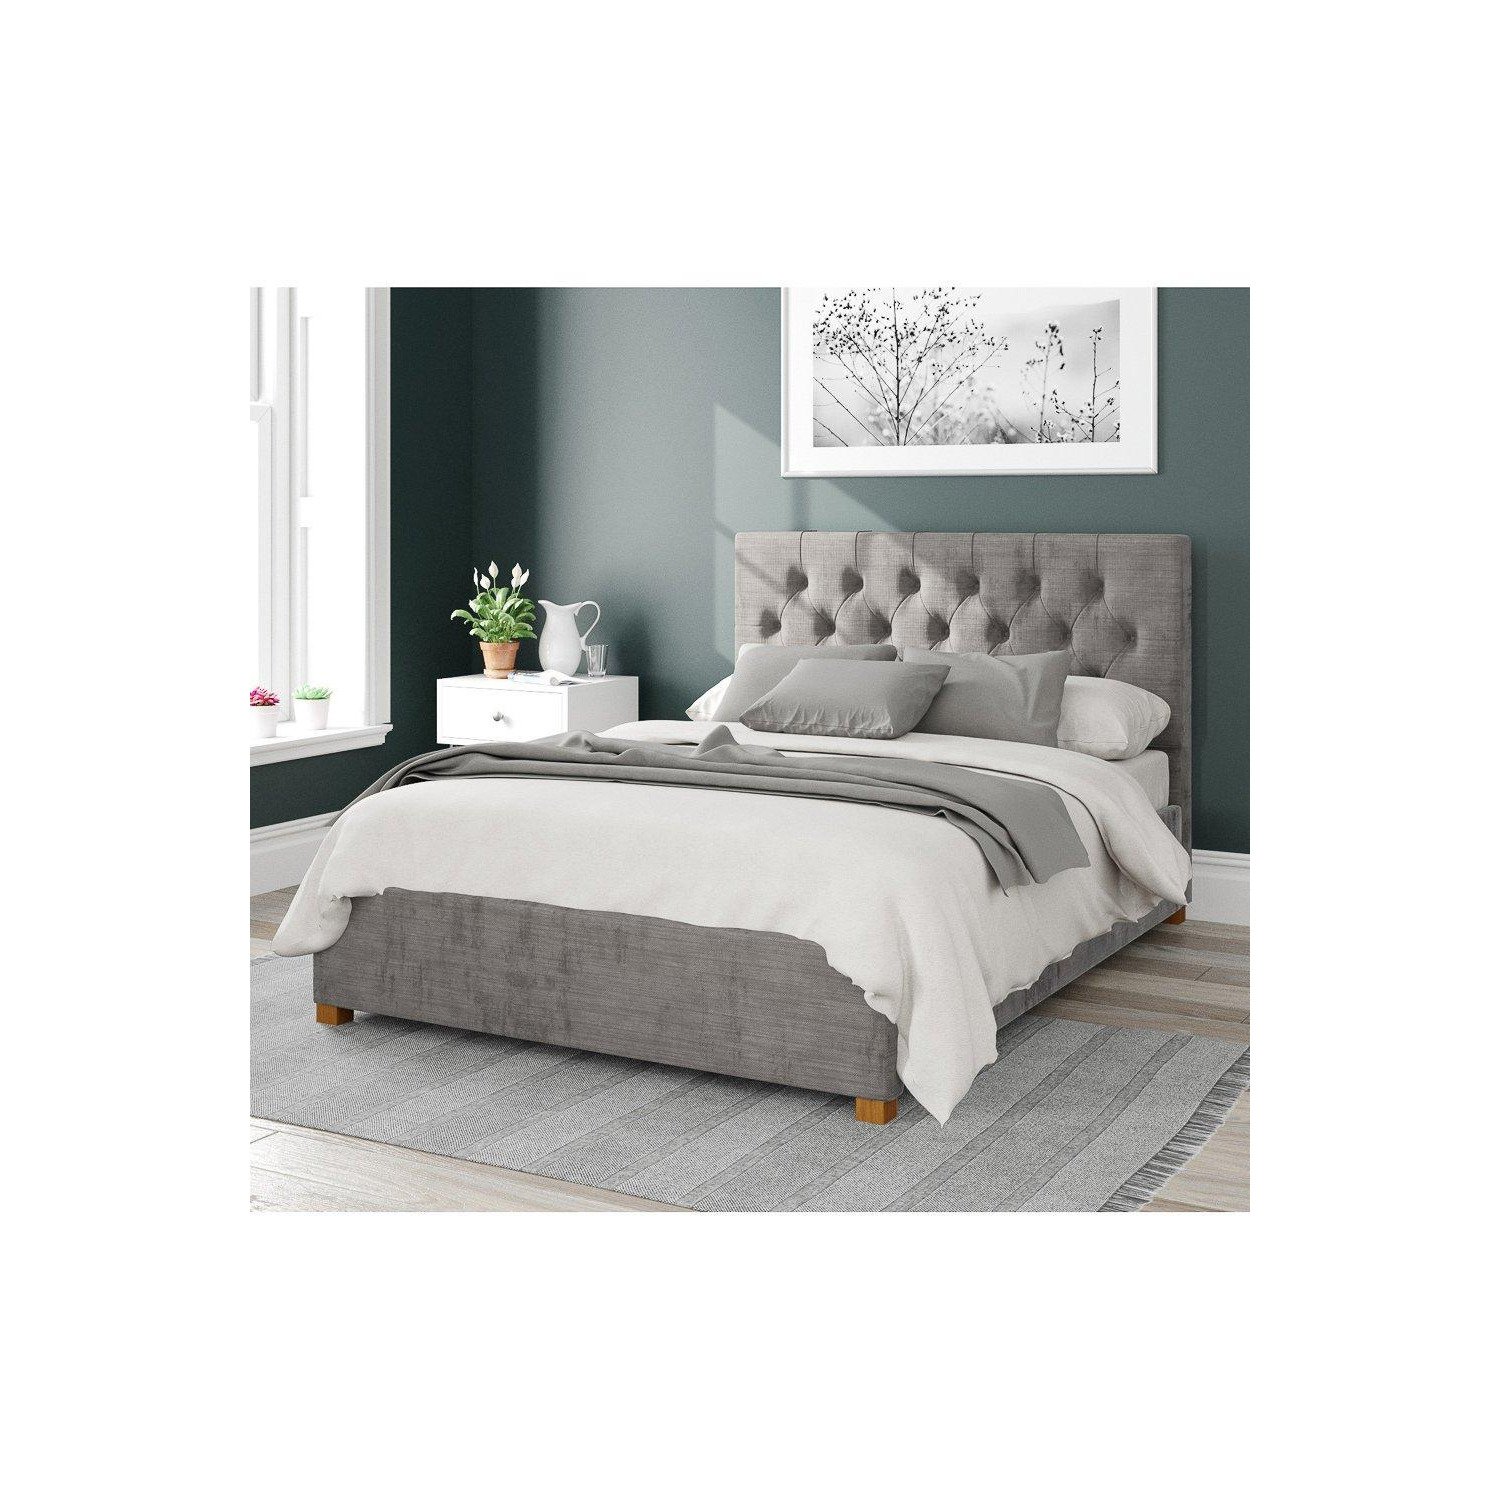 Olivier Upholstered Ottoman Storage Bed, Firenze Velour Fabric - image 1